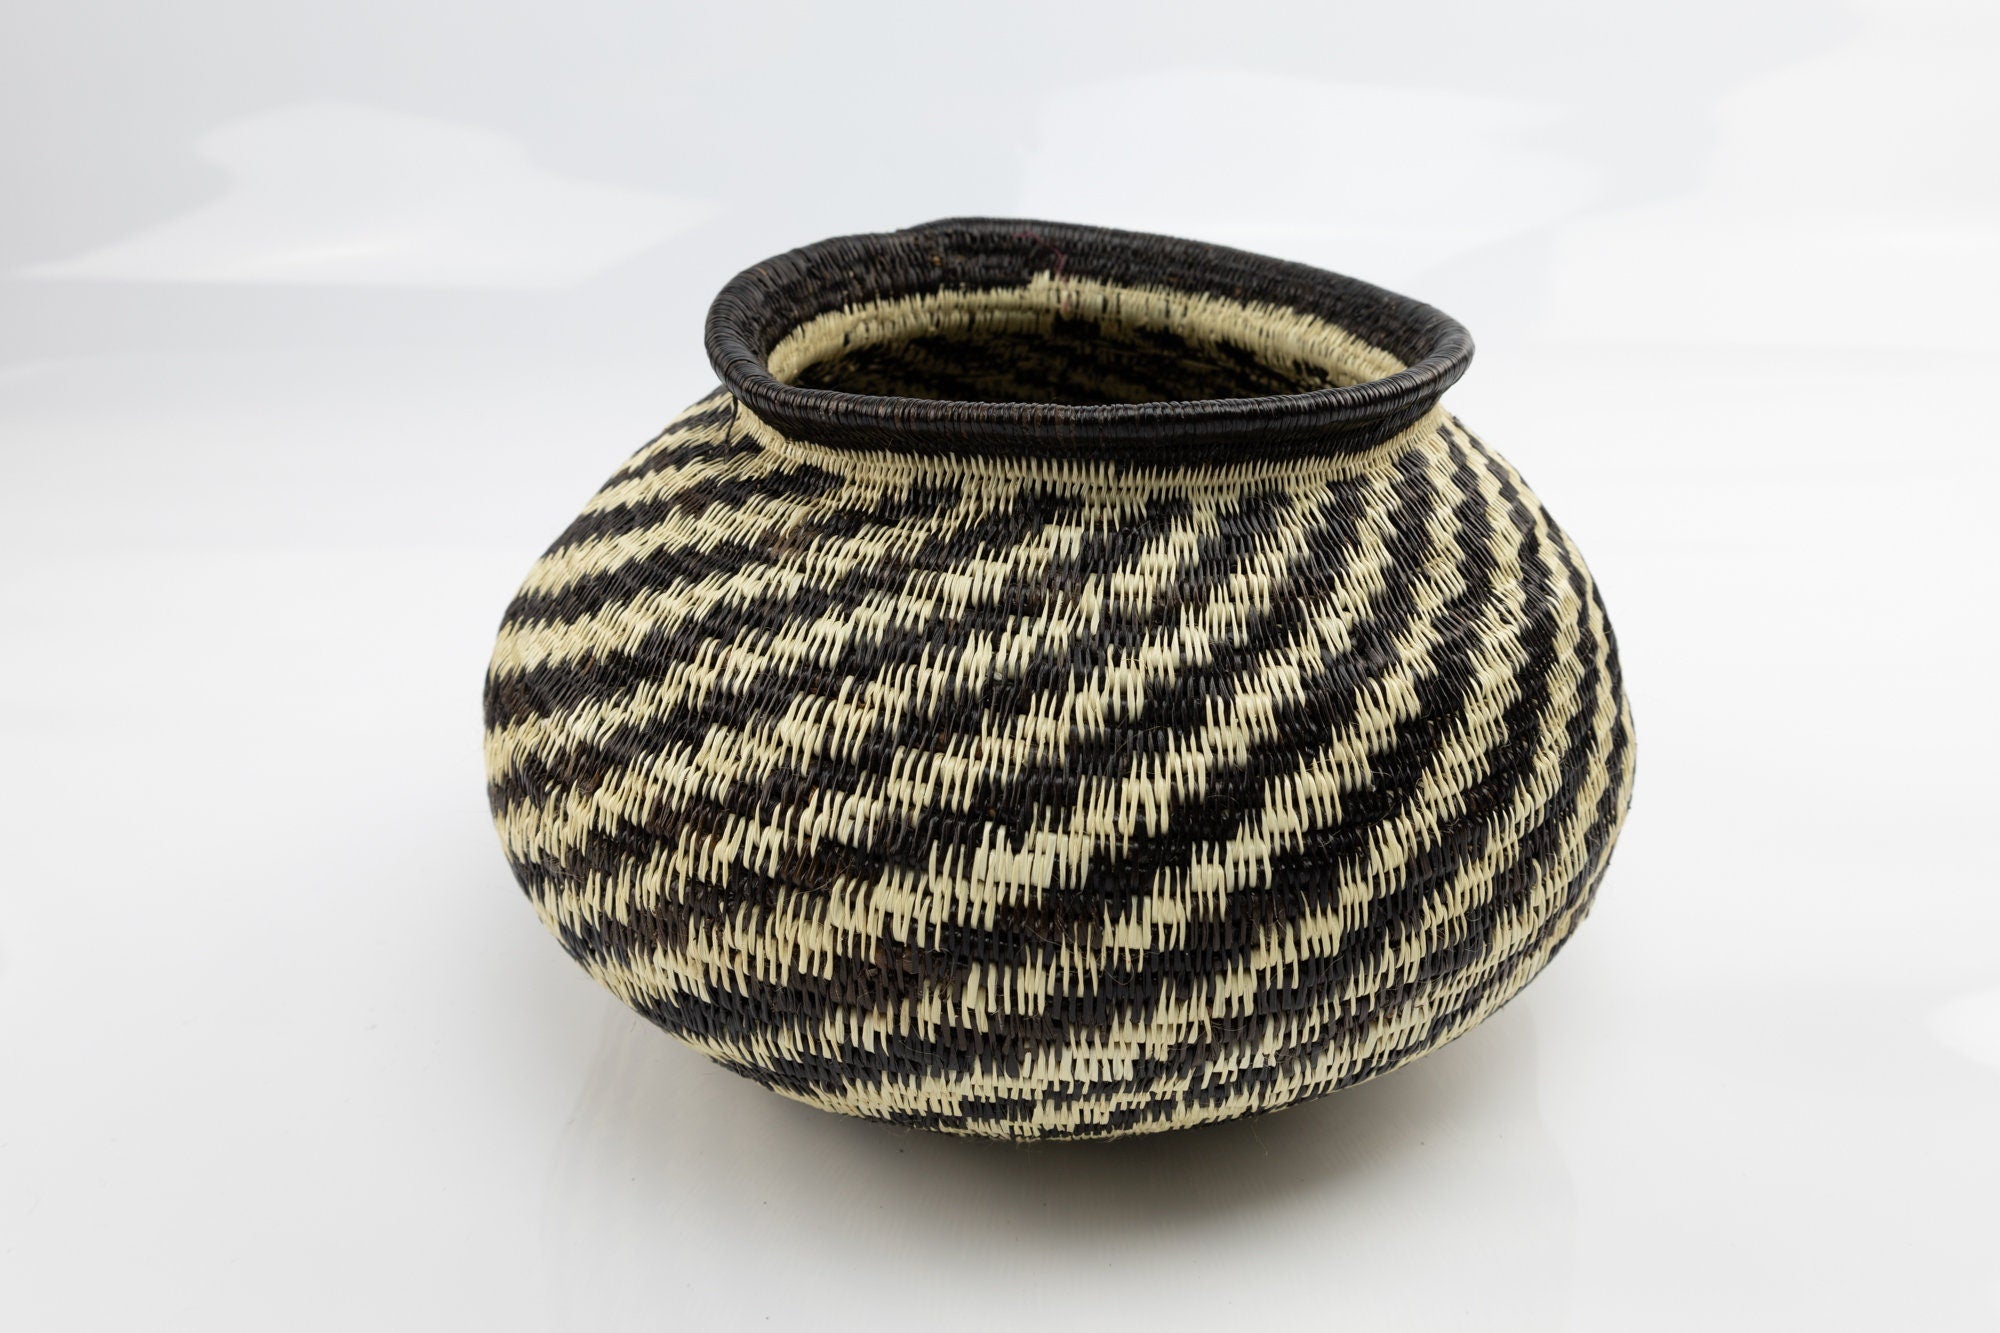 Hand Woven Large Basket Made By Wounaan And Emberá Panama Indians. Bowl Basket, Woven Basket, Basket Decor, Woven Storage